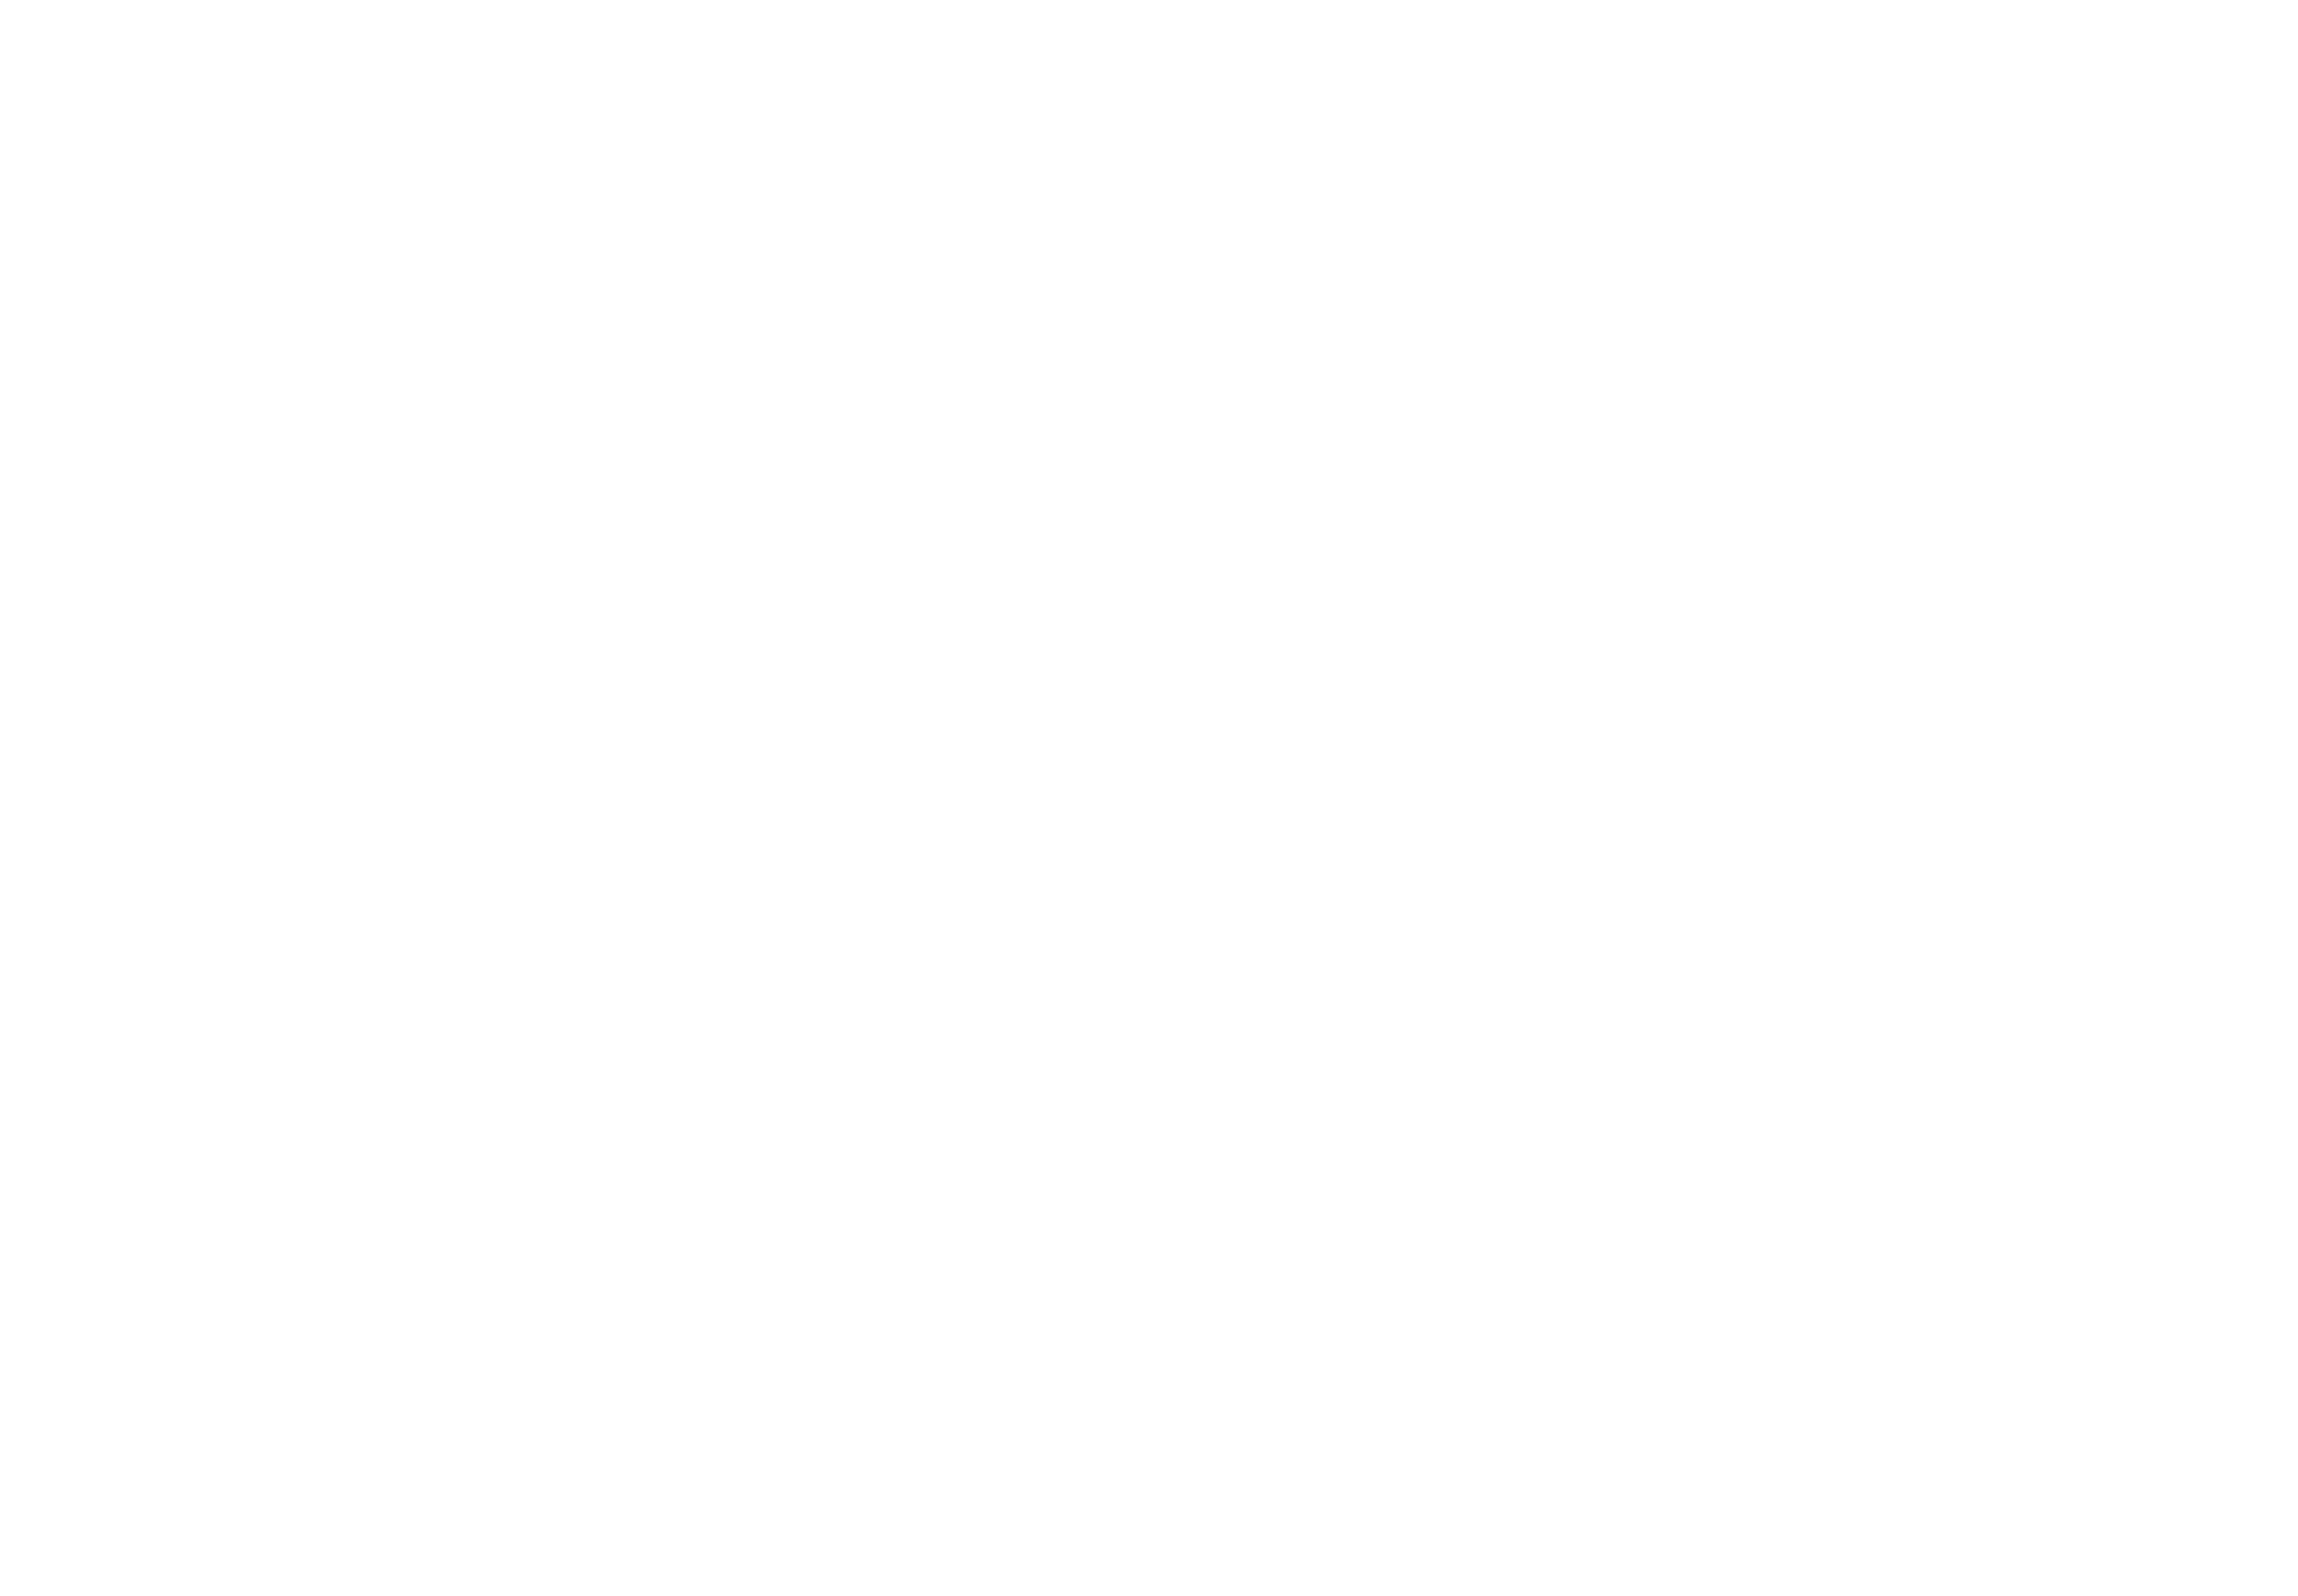 Made in 1969